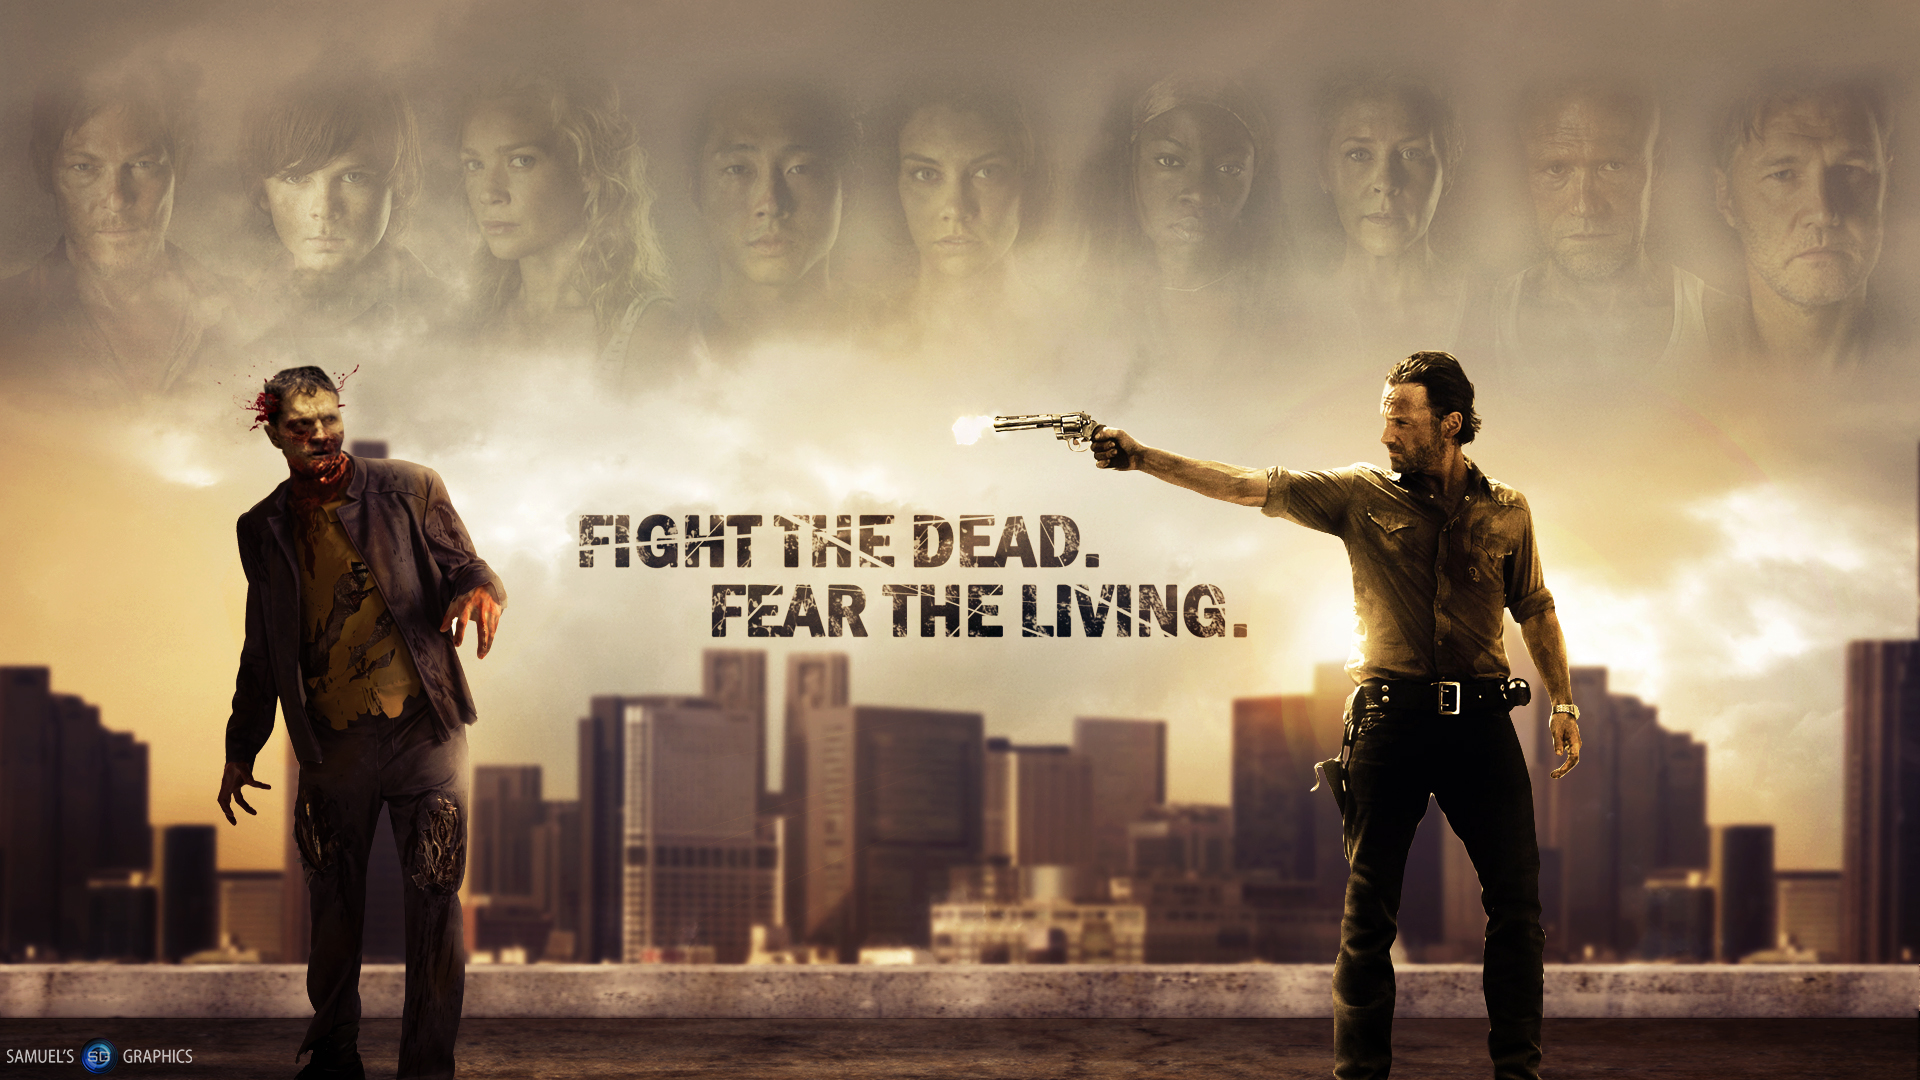 Free Download Ultra Hd The Walking Dead Wallpapers 17jg1ns 4usky 19x1080 For Your Desktop Mobile Tablet Explore 62 The Walking Dead Wallpaper 1366x768 The Walking Dead Wallpaper Hd Free